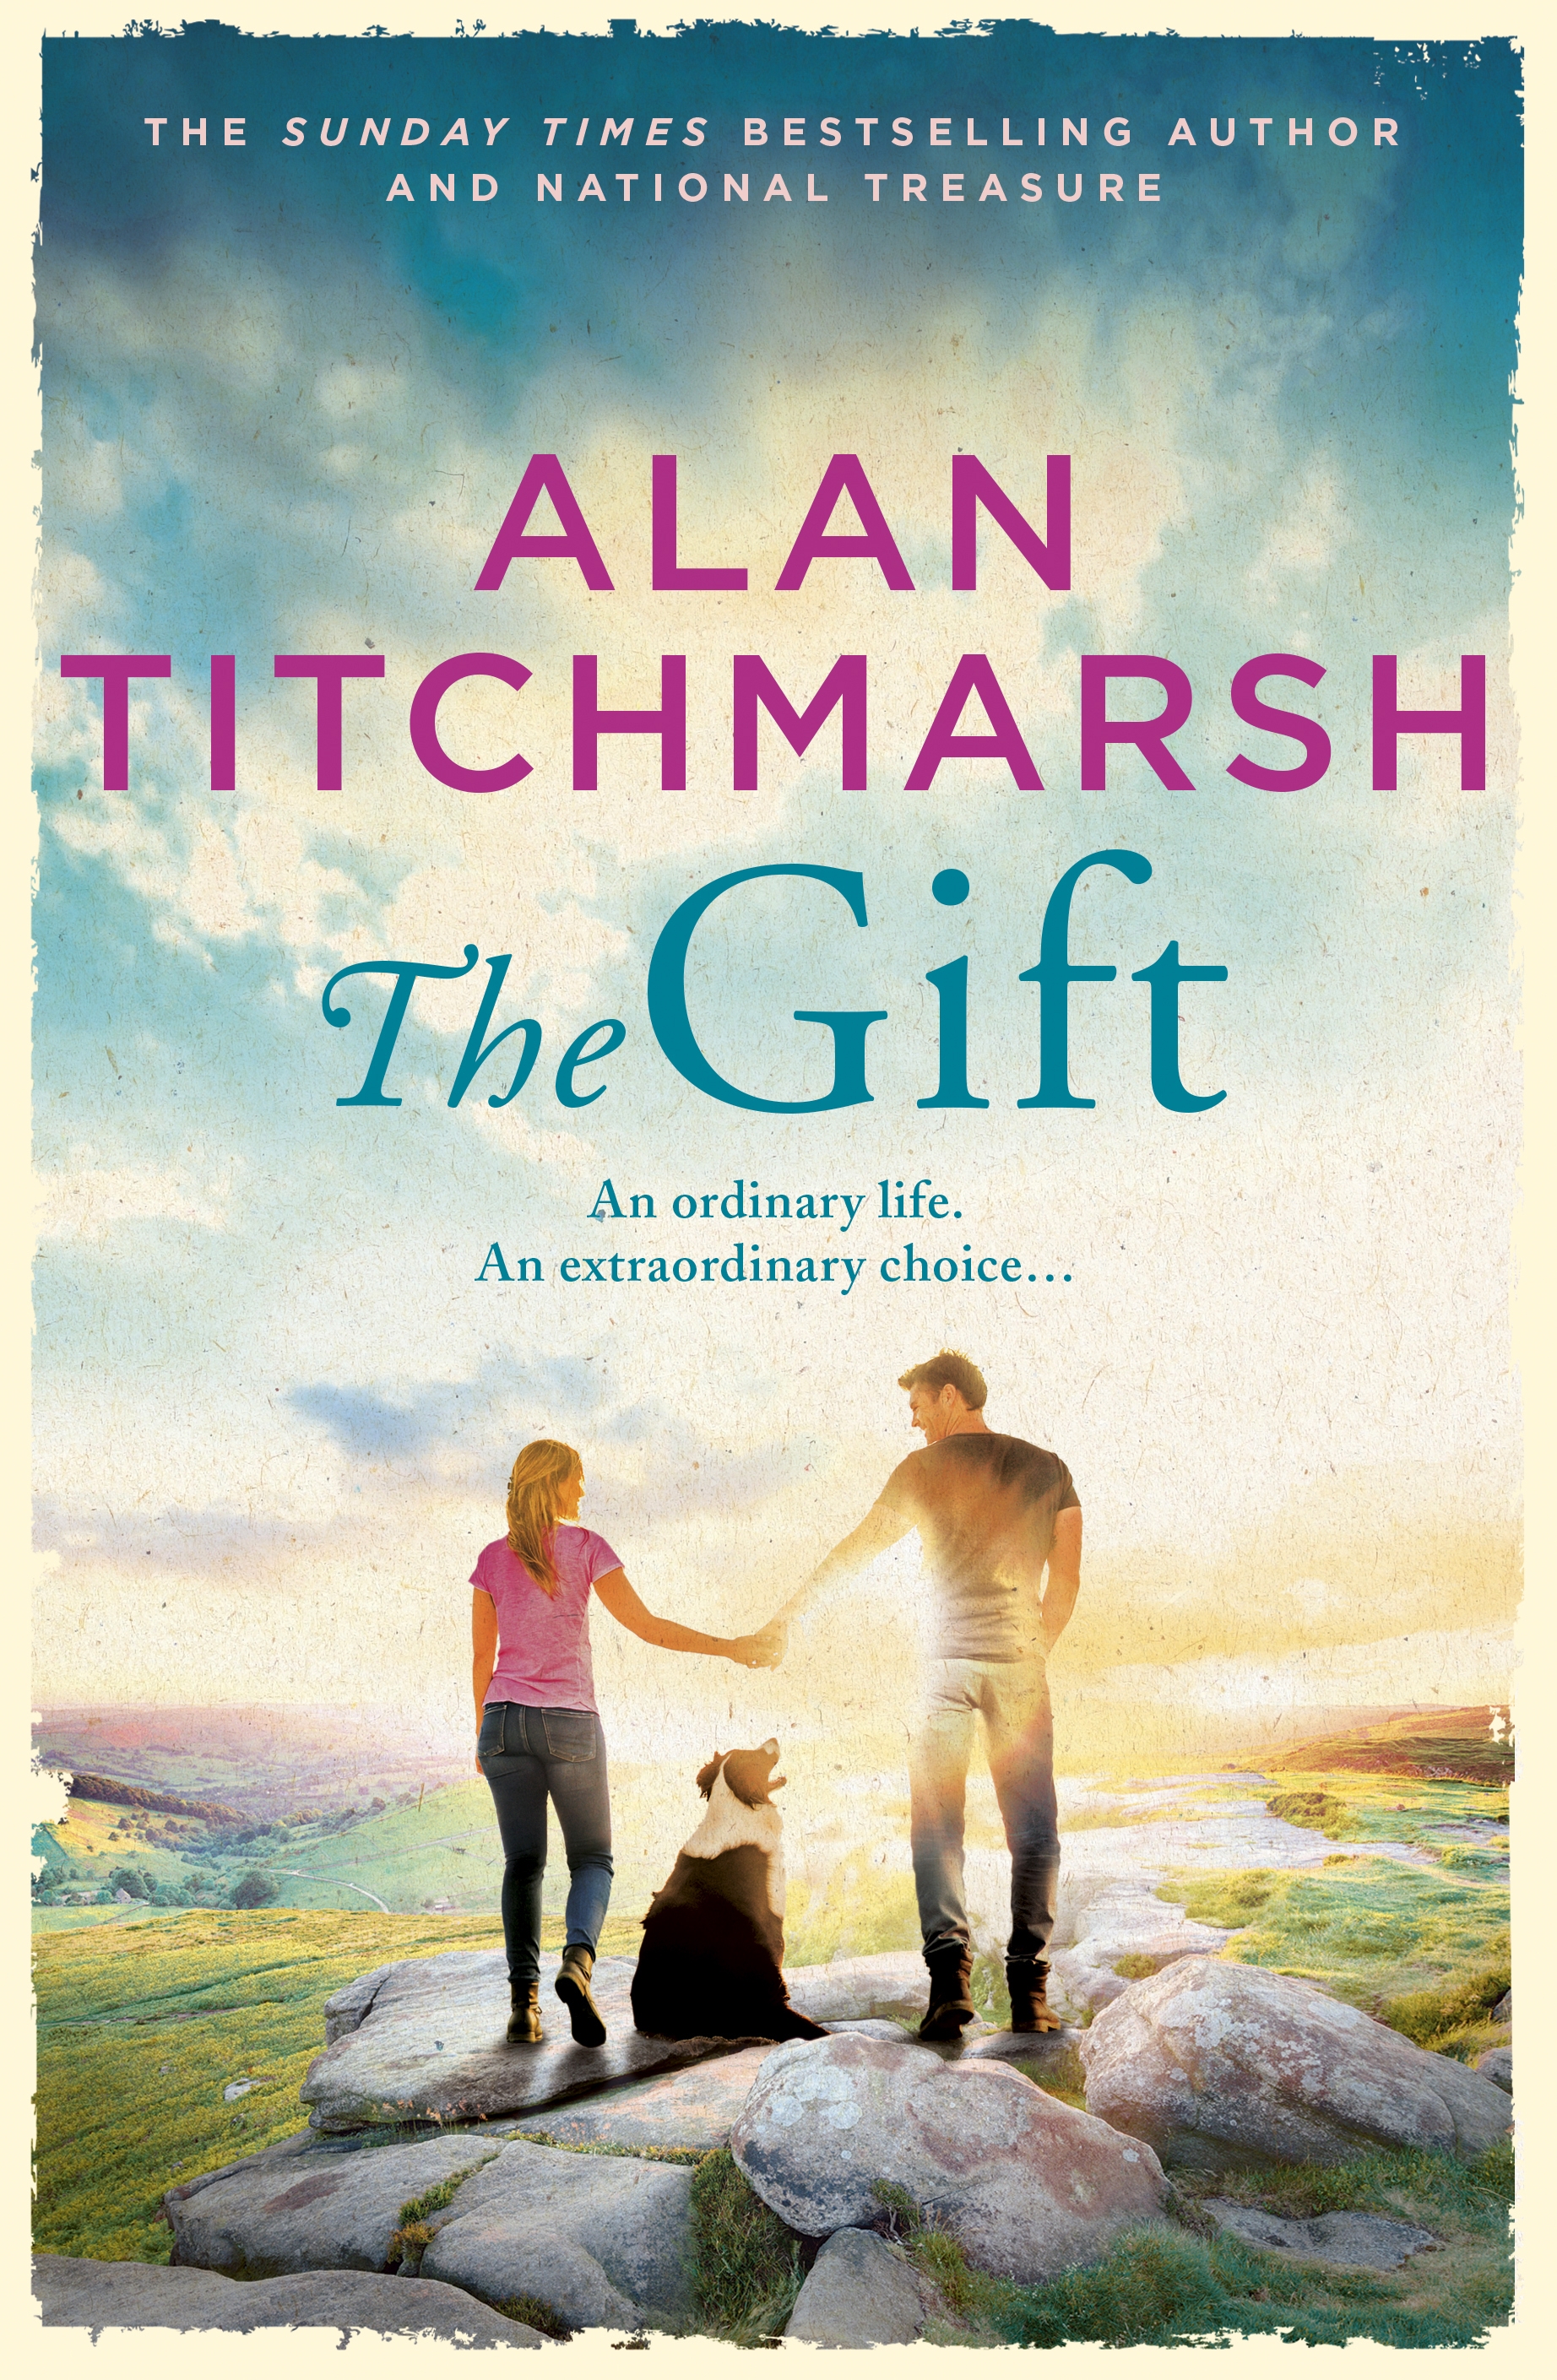 Book jacket of The Gift by Alan Titchmarsh (Hodder & Stoughton/PA)